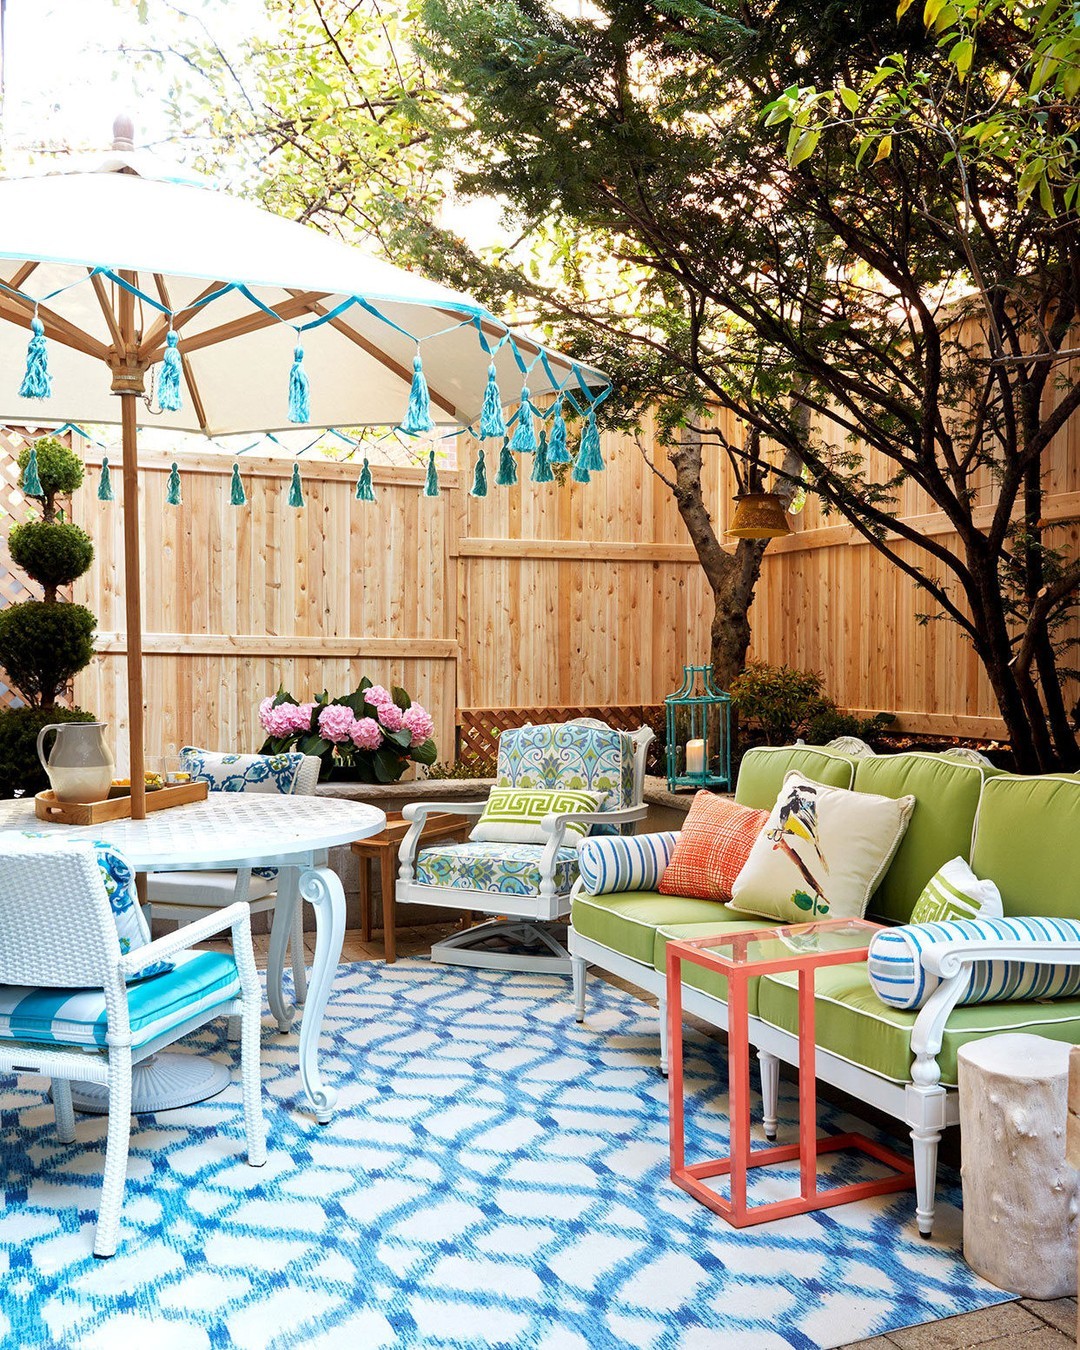 A colorfully decorated backyard patio area with couches and a standing umbrella. Photo by Instagram user @betterhomesandgardens